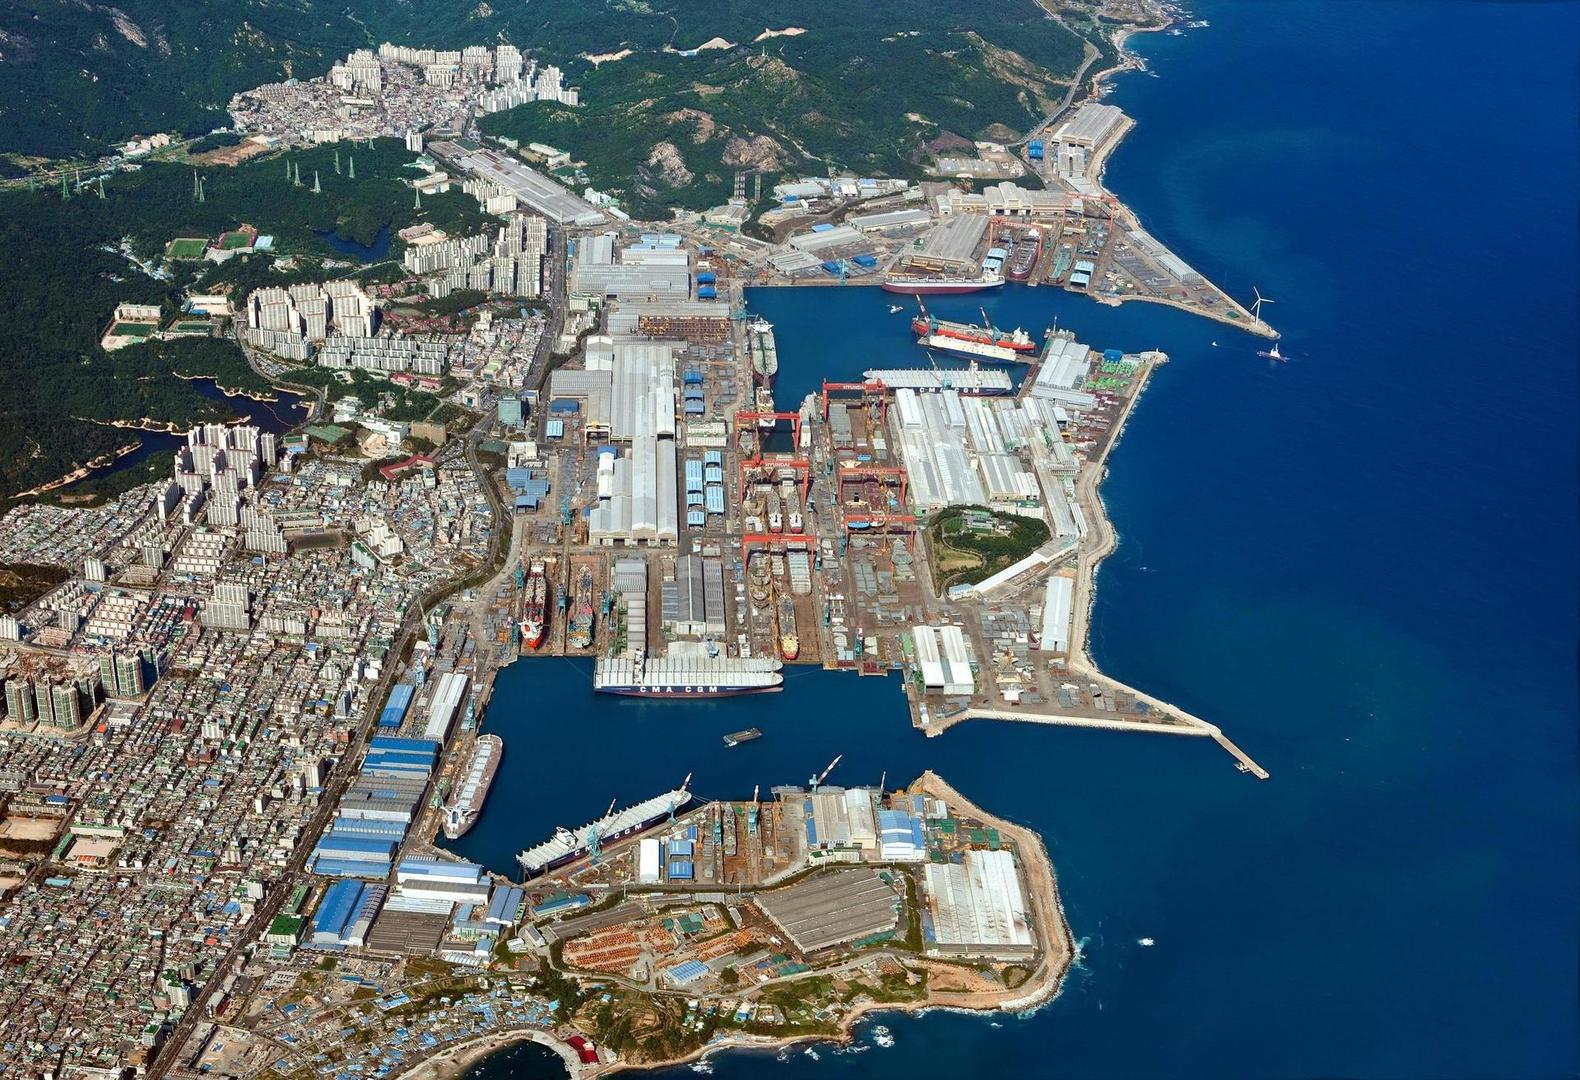 Hyundai-Heavy-Industries-shipyard-in-Ulsan-South-Korea-the-largest-in-the-world-